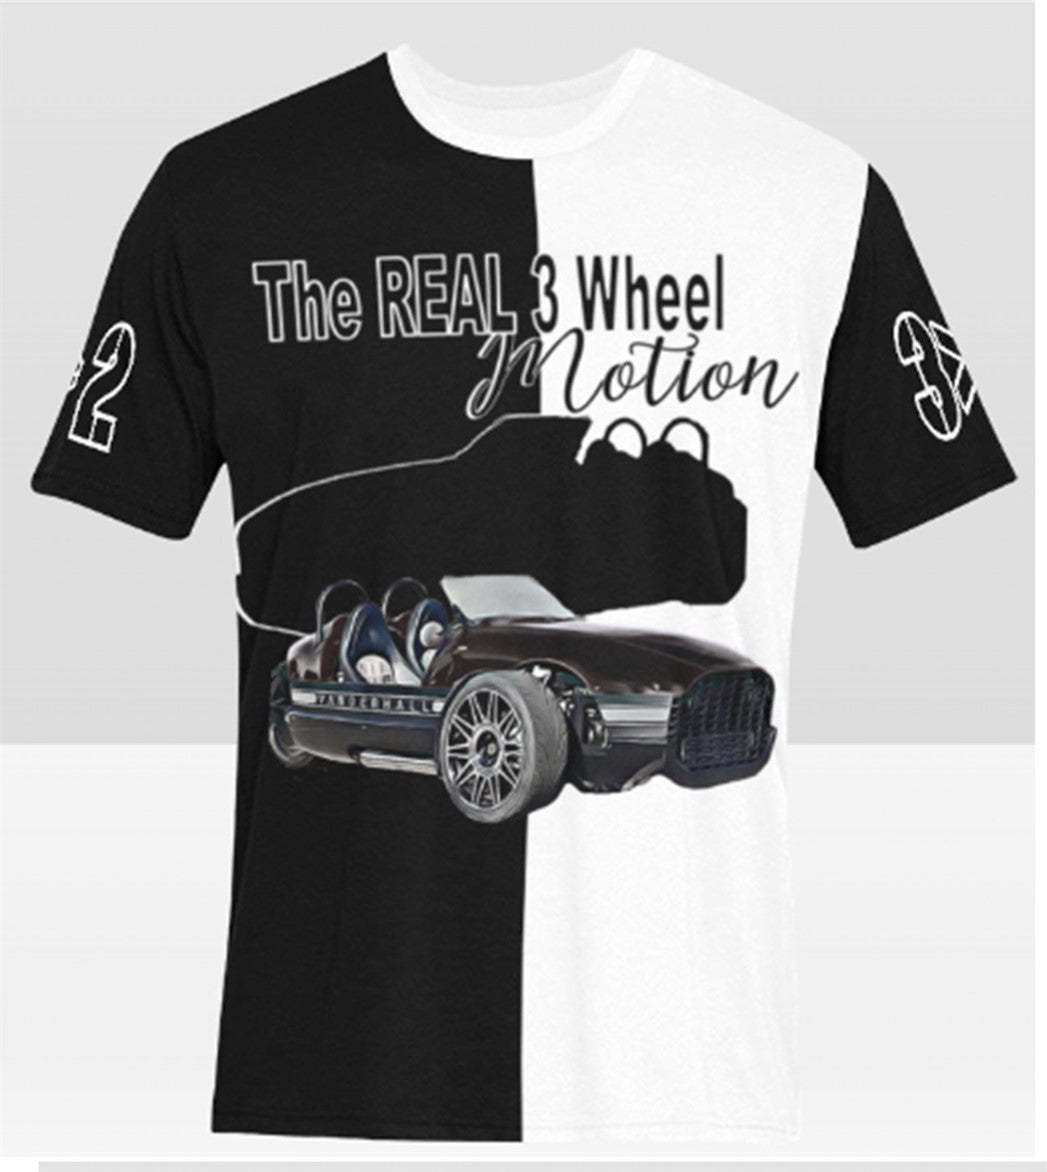 3>2 Customizable Vanderhall Tee Wht - Enter your custom bike color for the bike image, right side and sleeves.